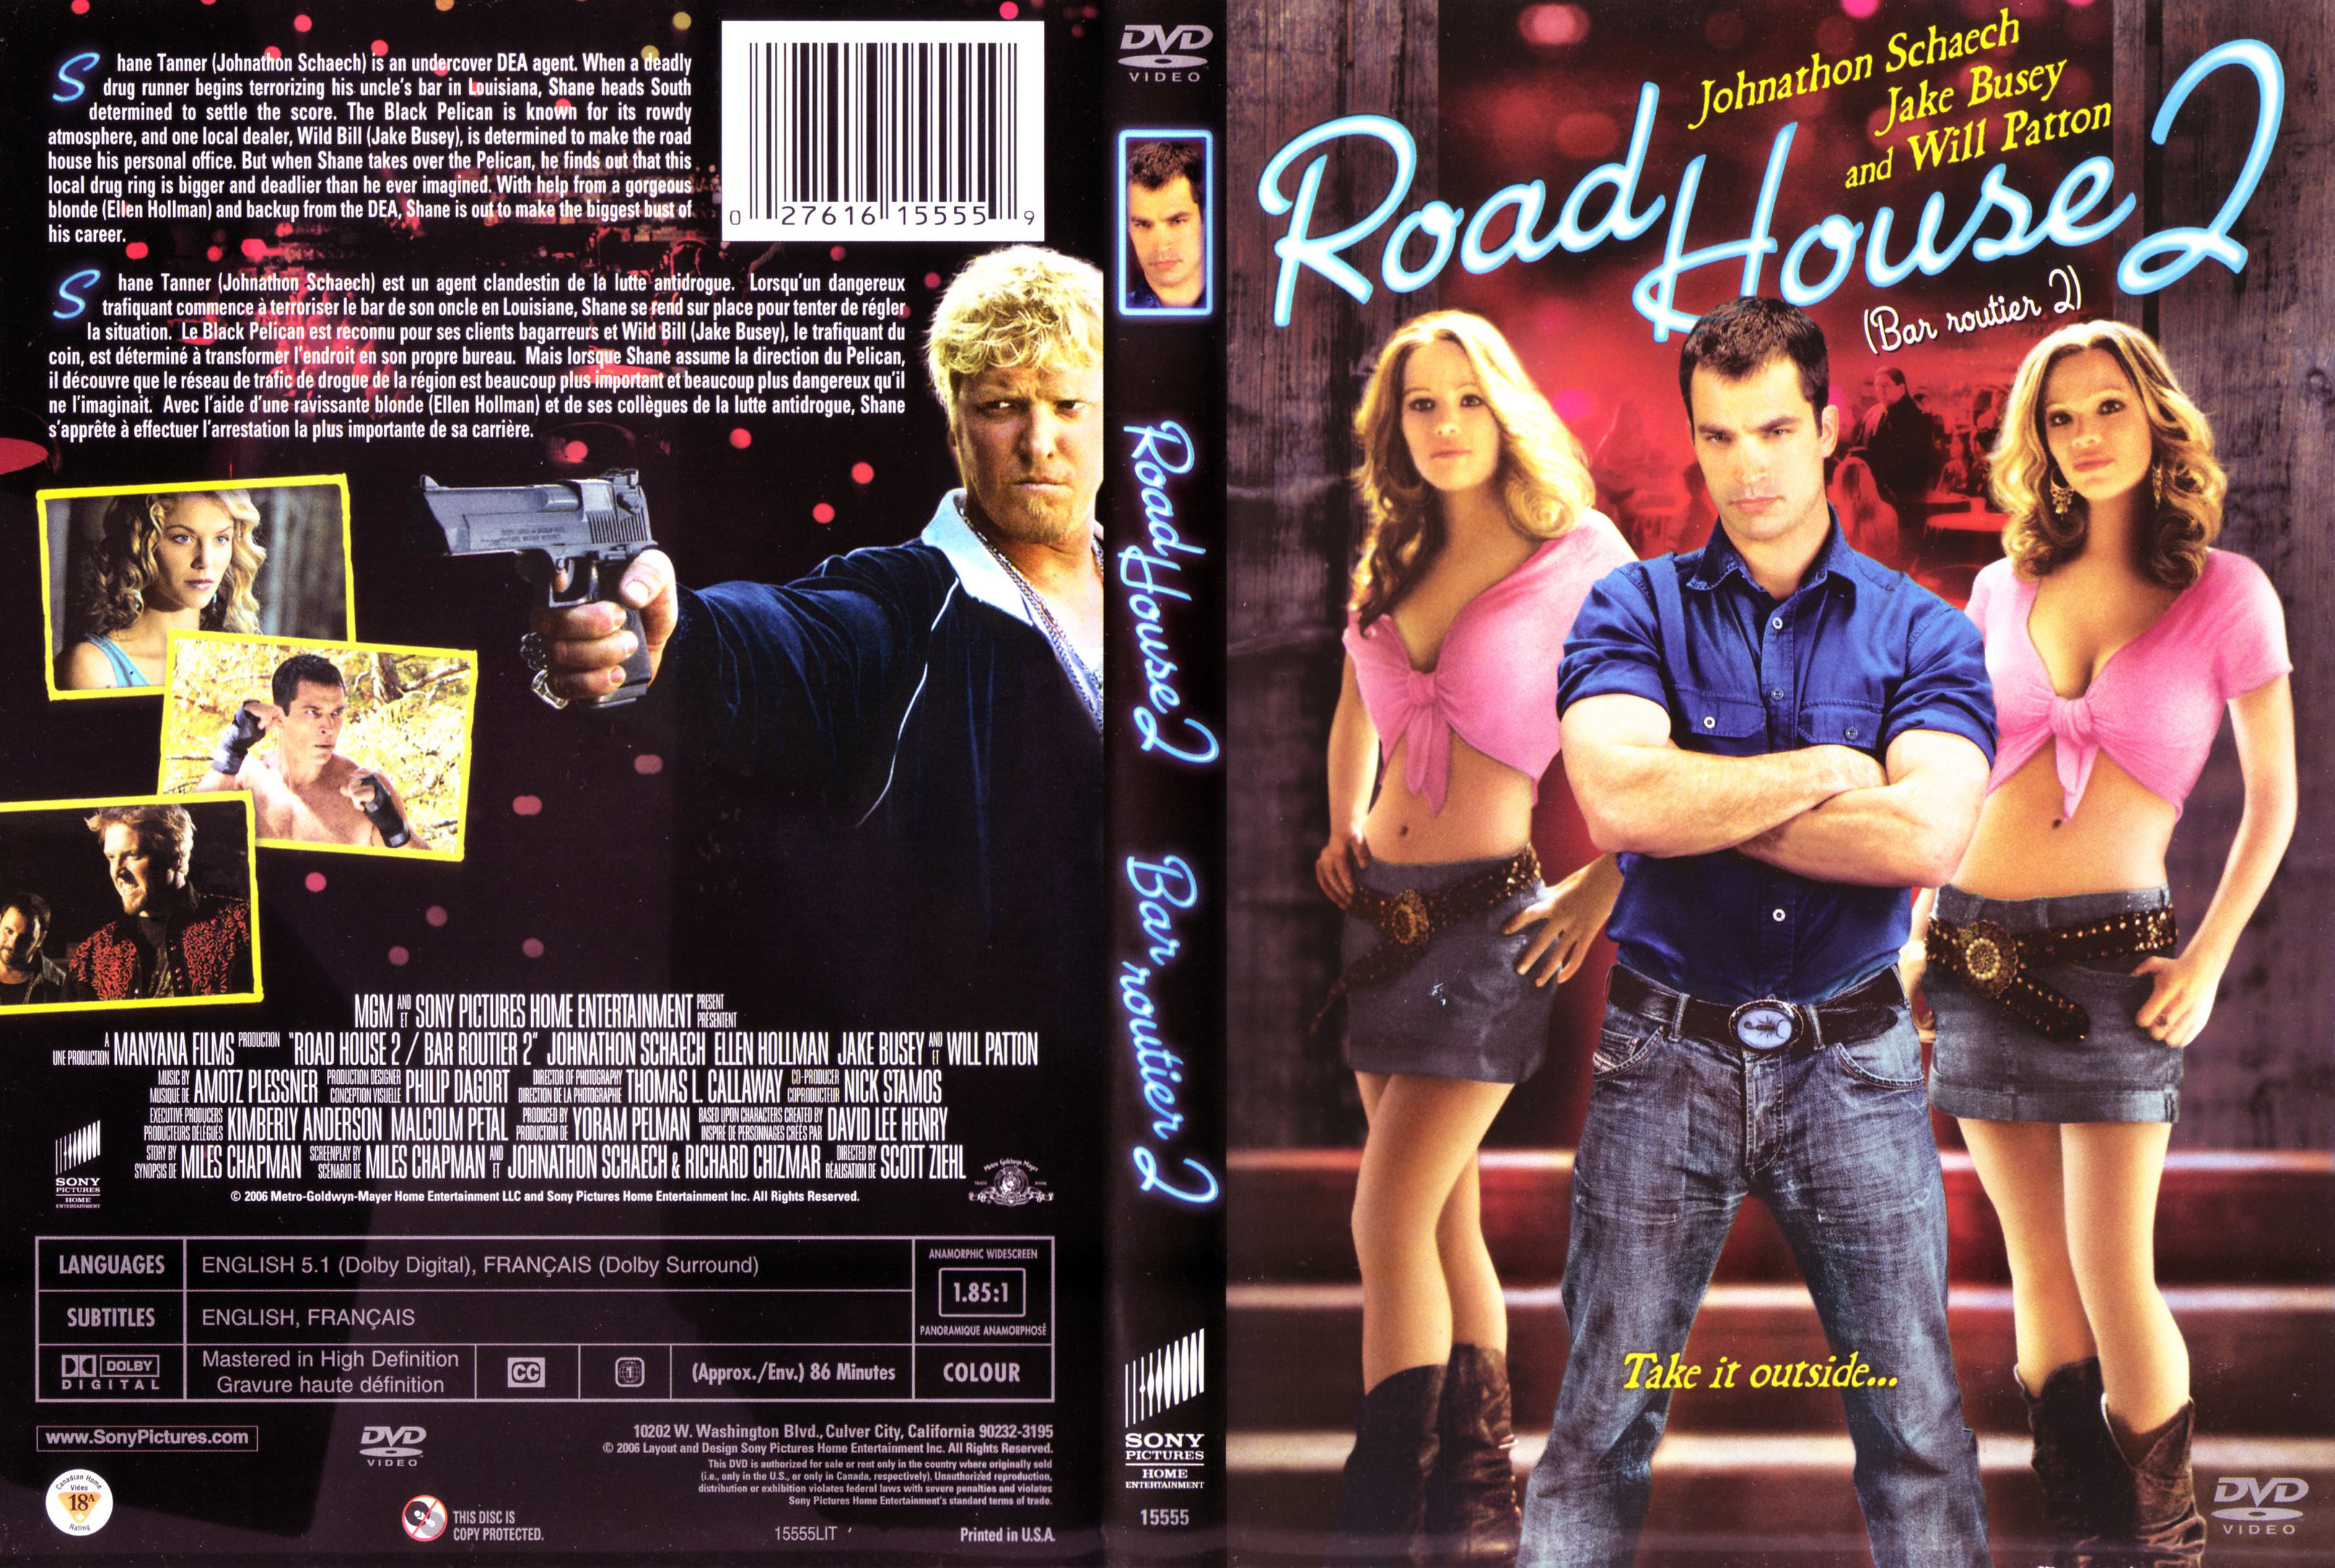 Jaquette DVD Road house 2 Zone 1